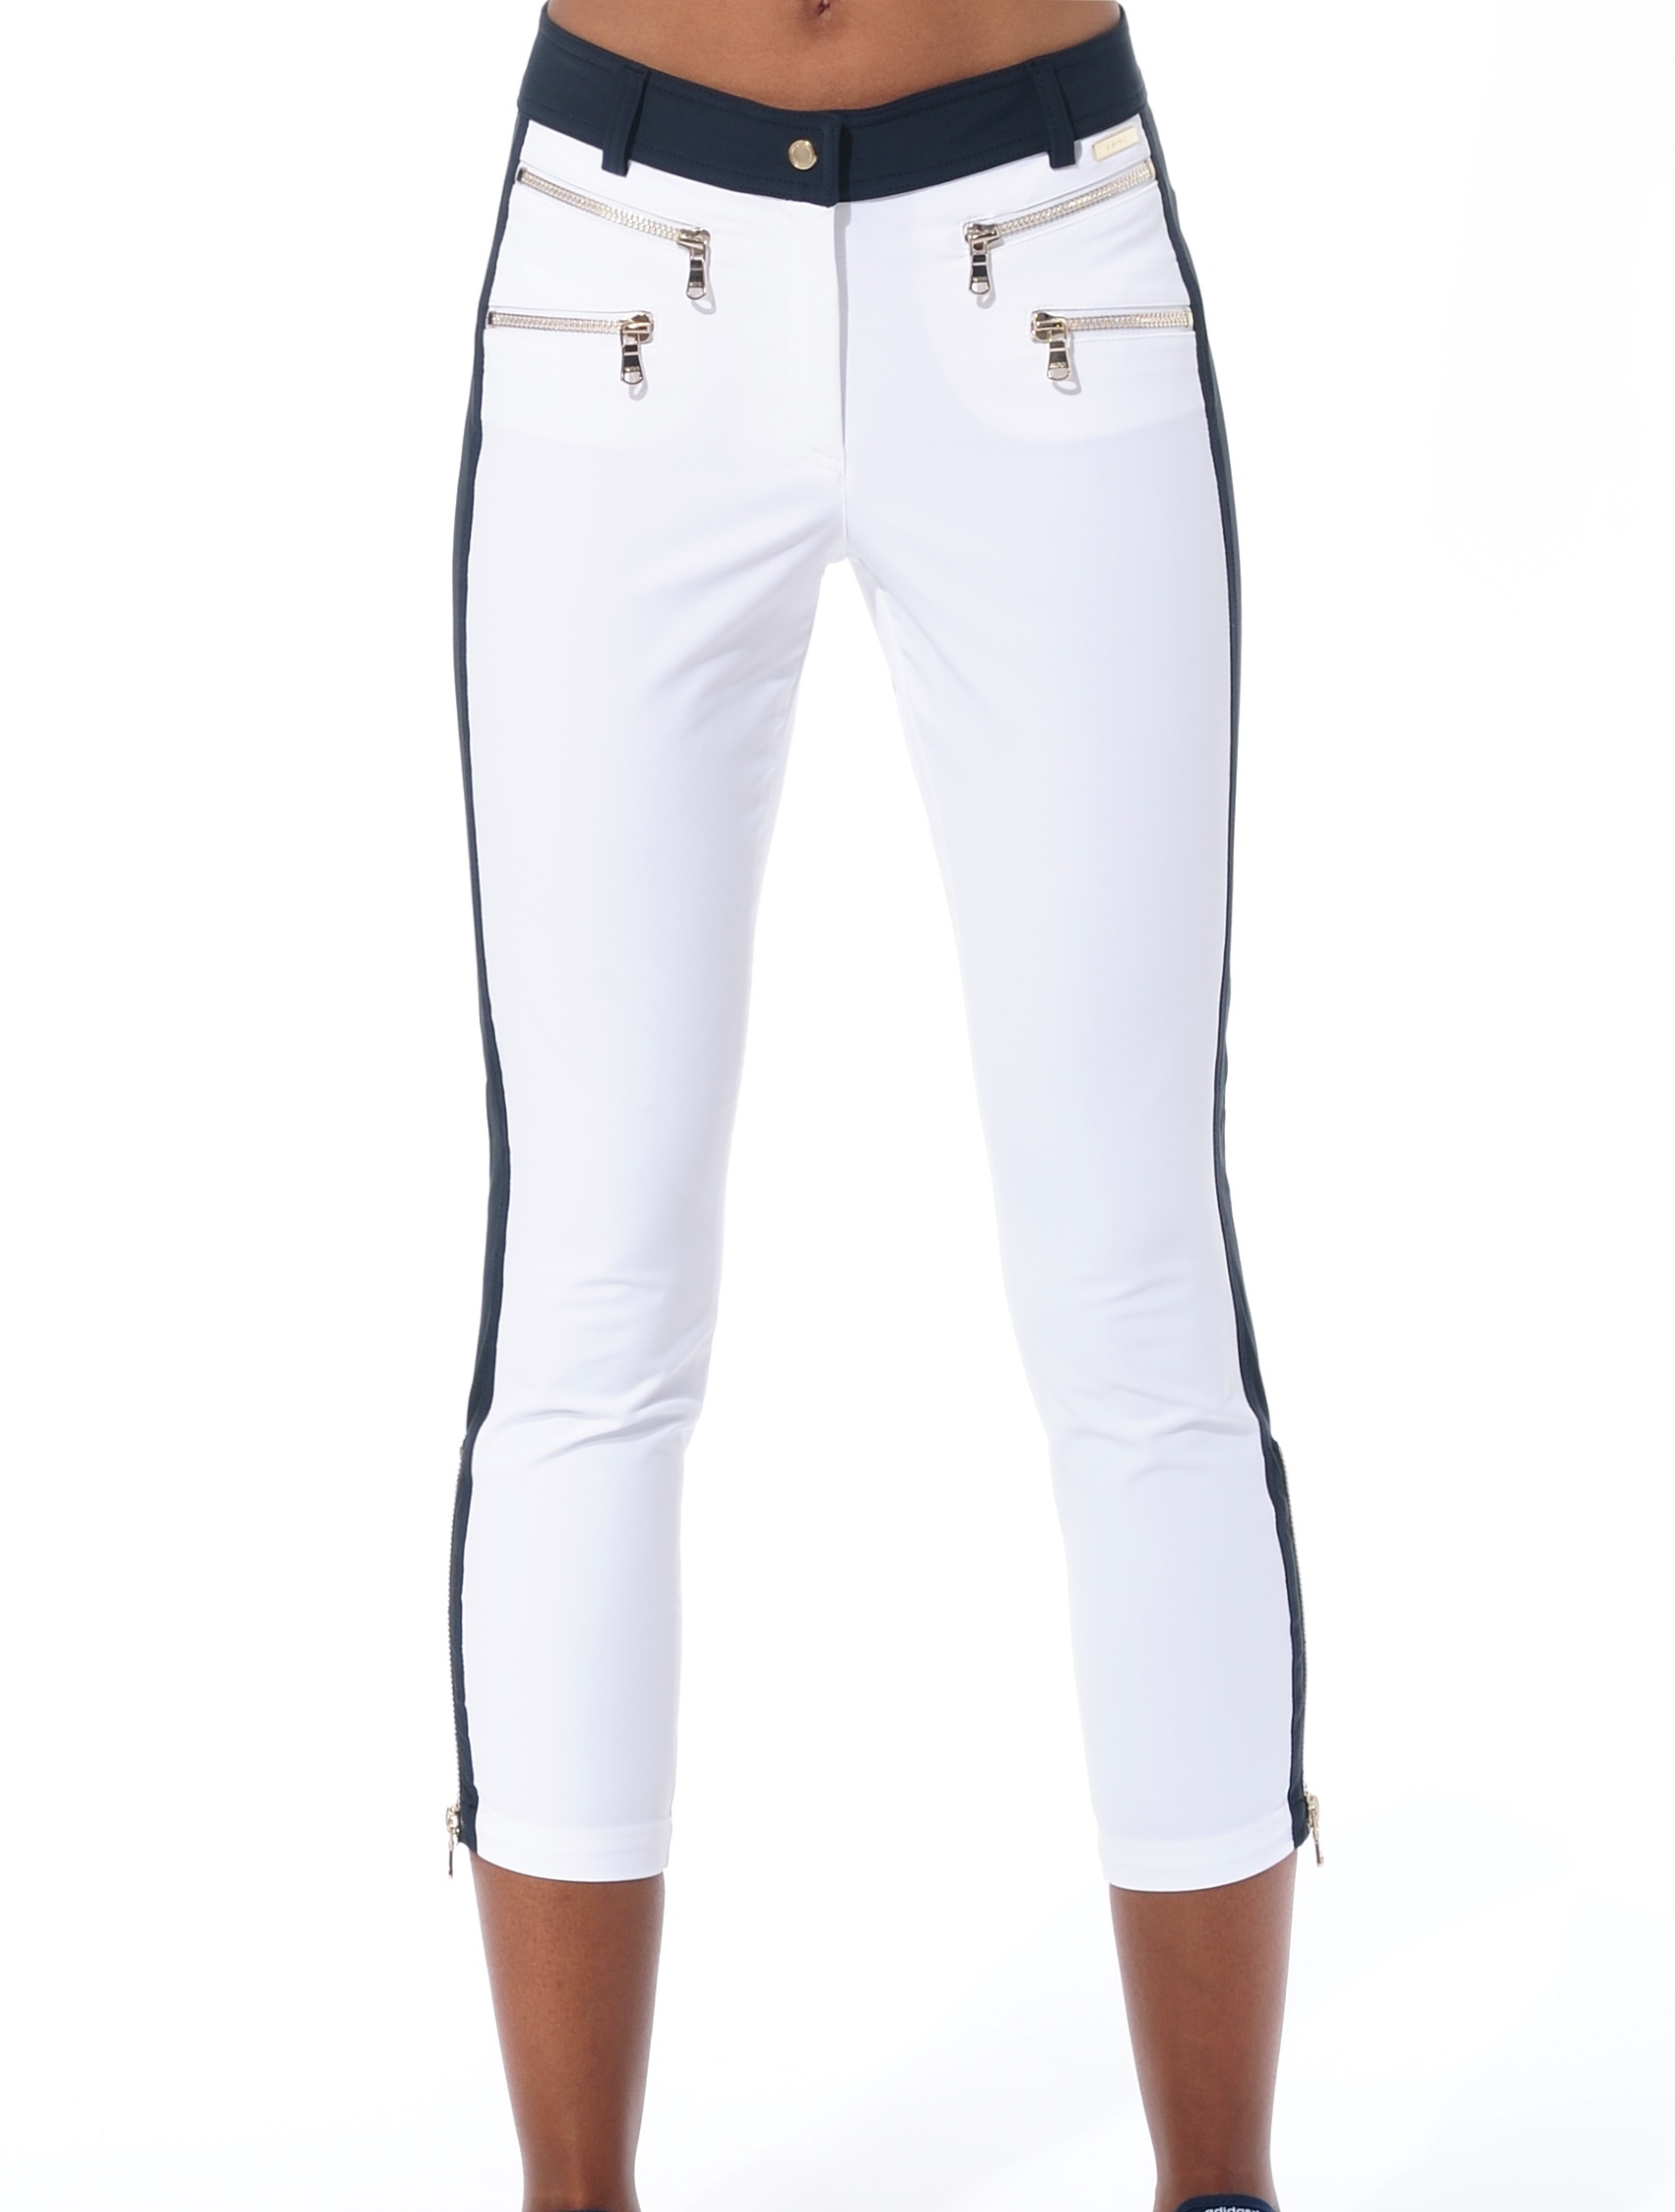 4way stretch double zip cropped pants white/night blue 